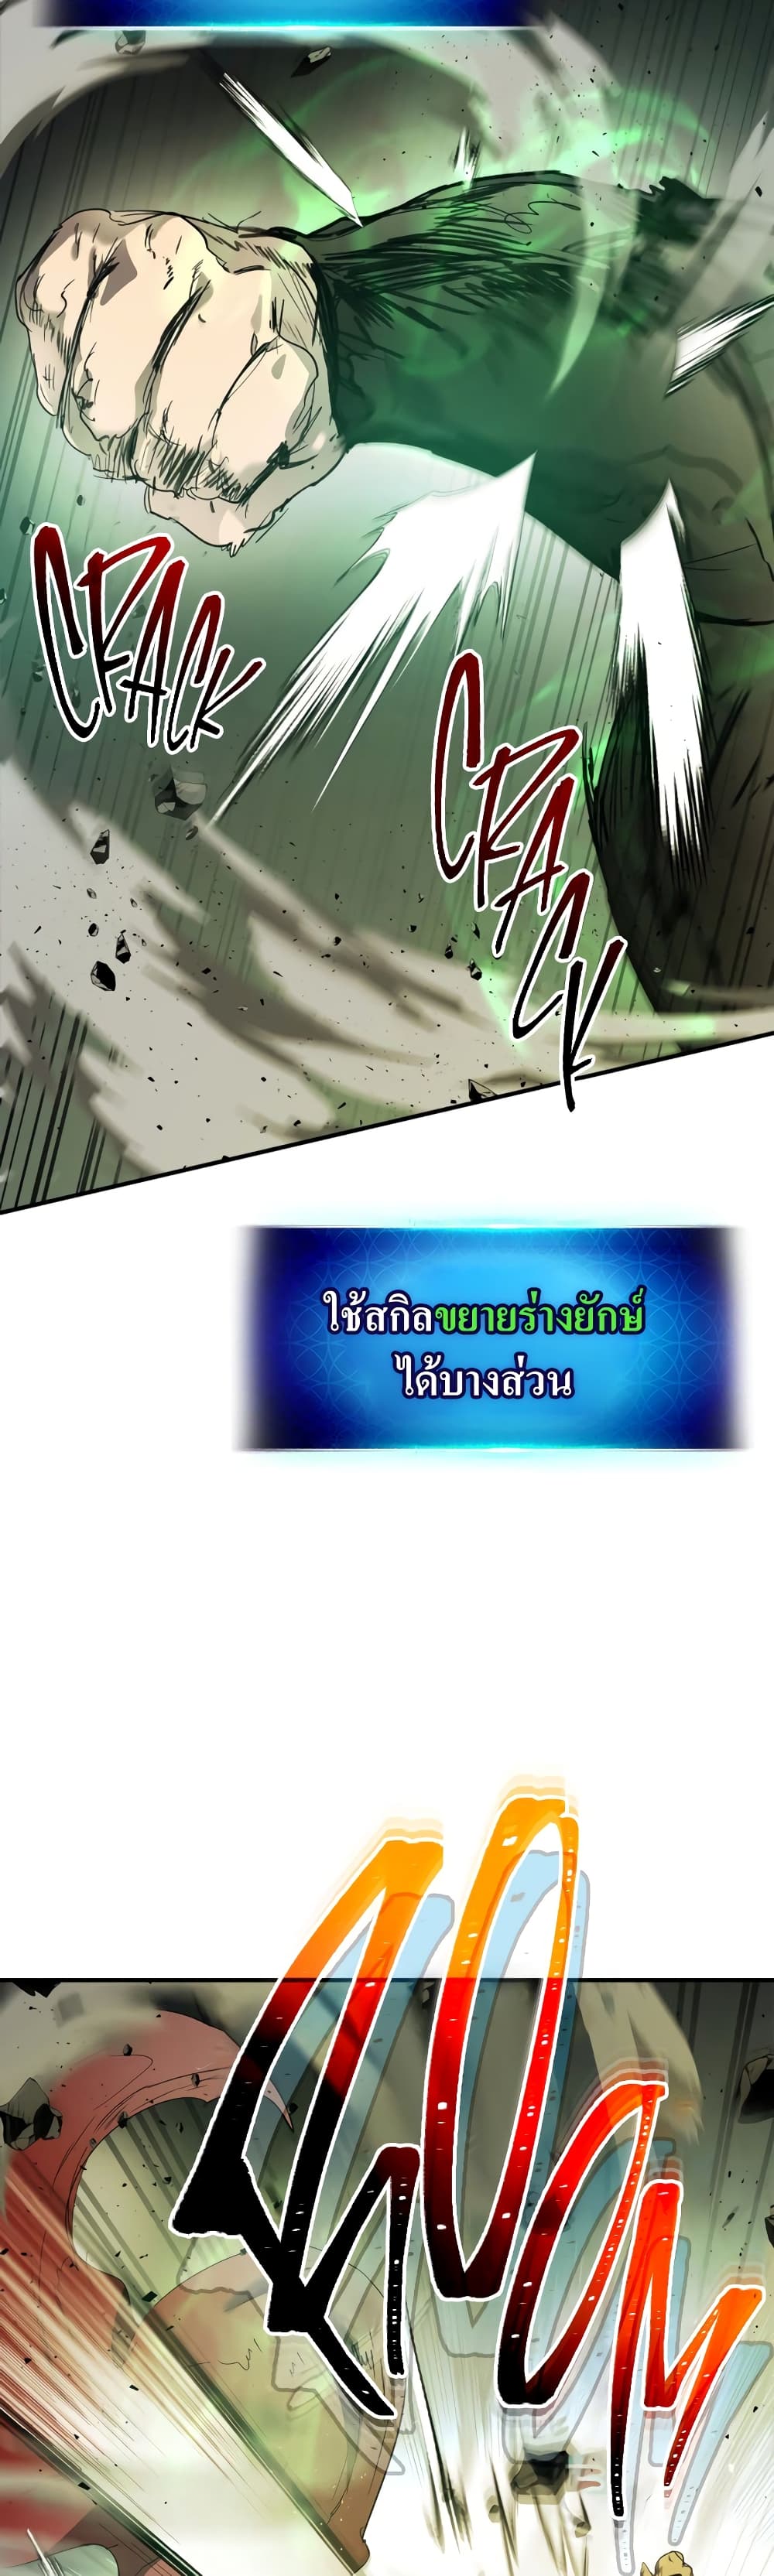 Leveling With The Gods 38 แปลไทย